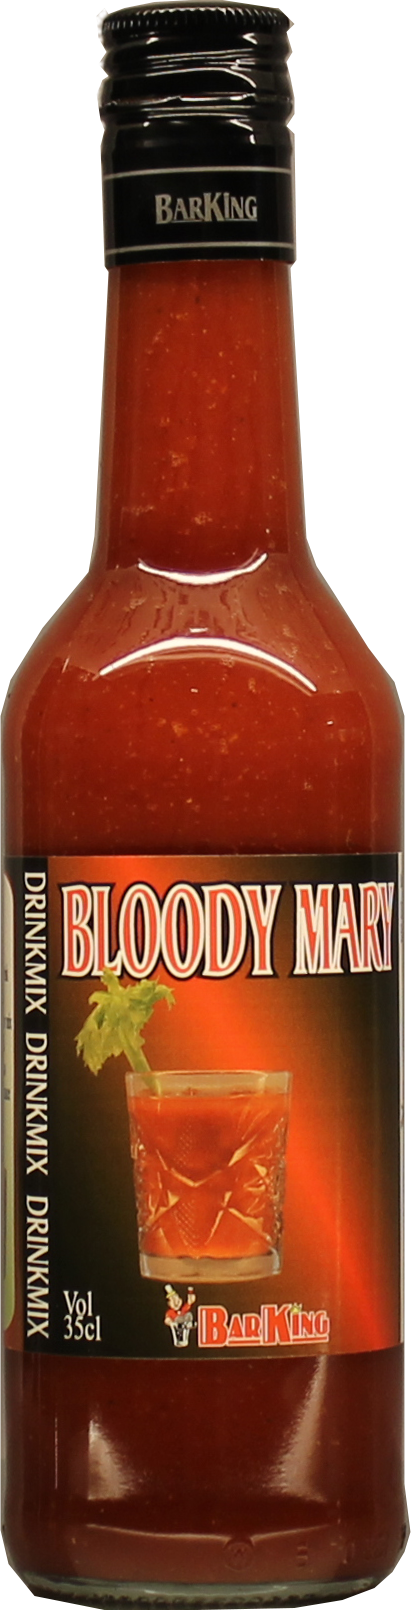 Bloody Mary 35cl